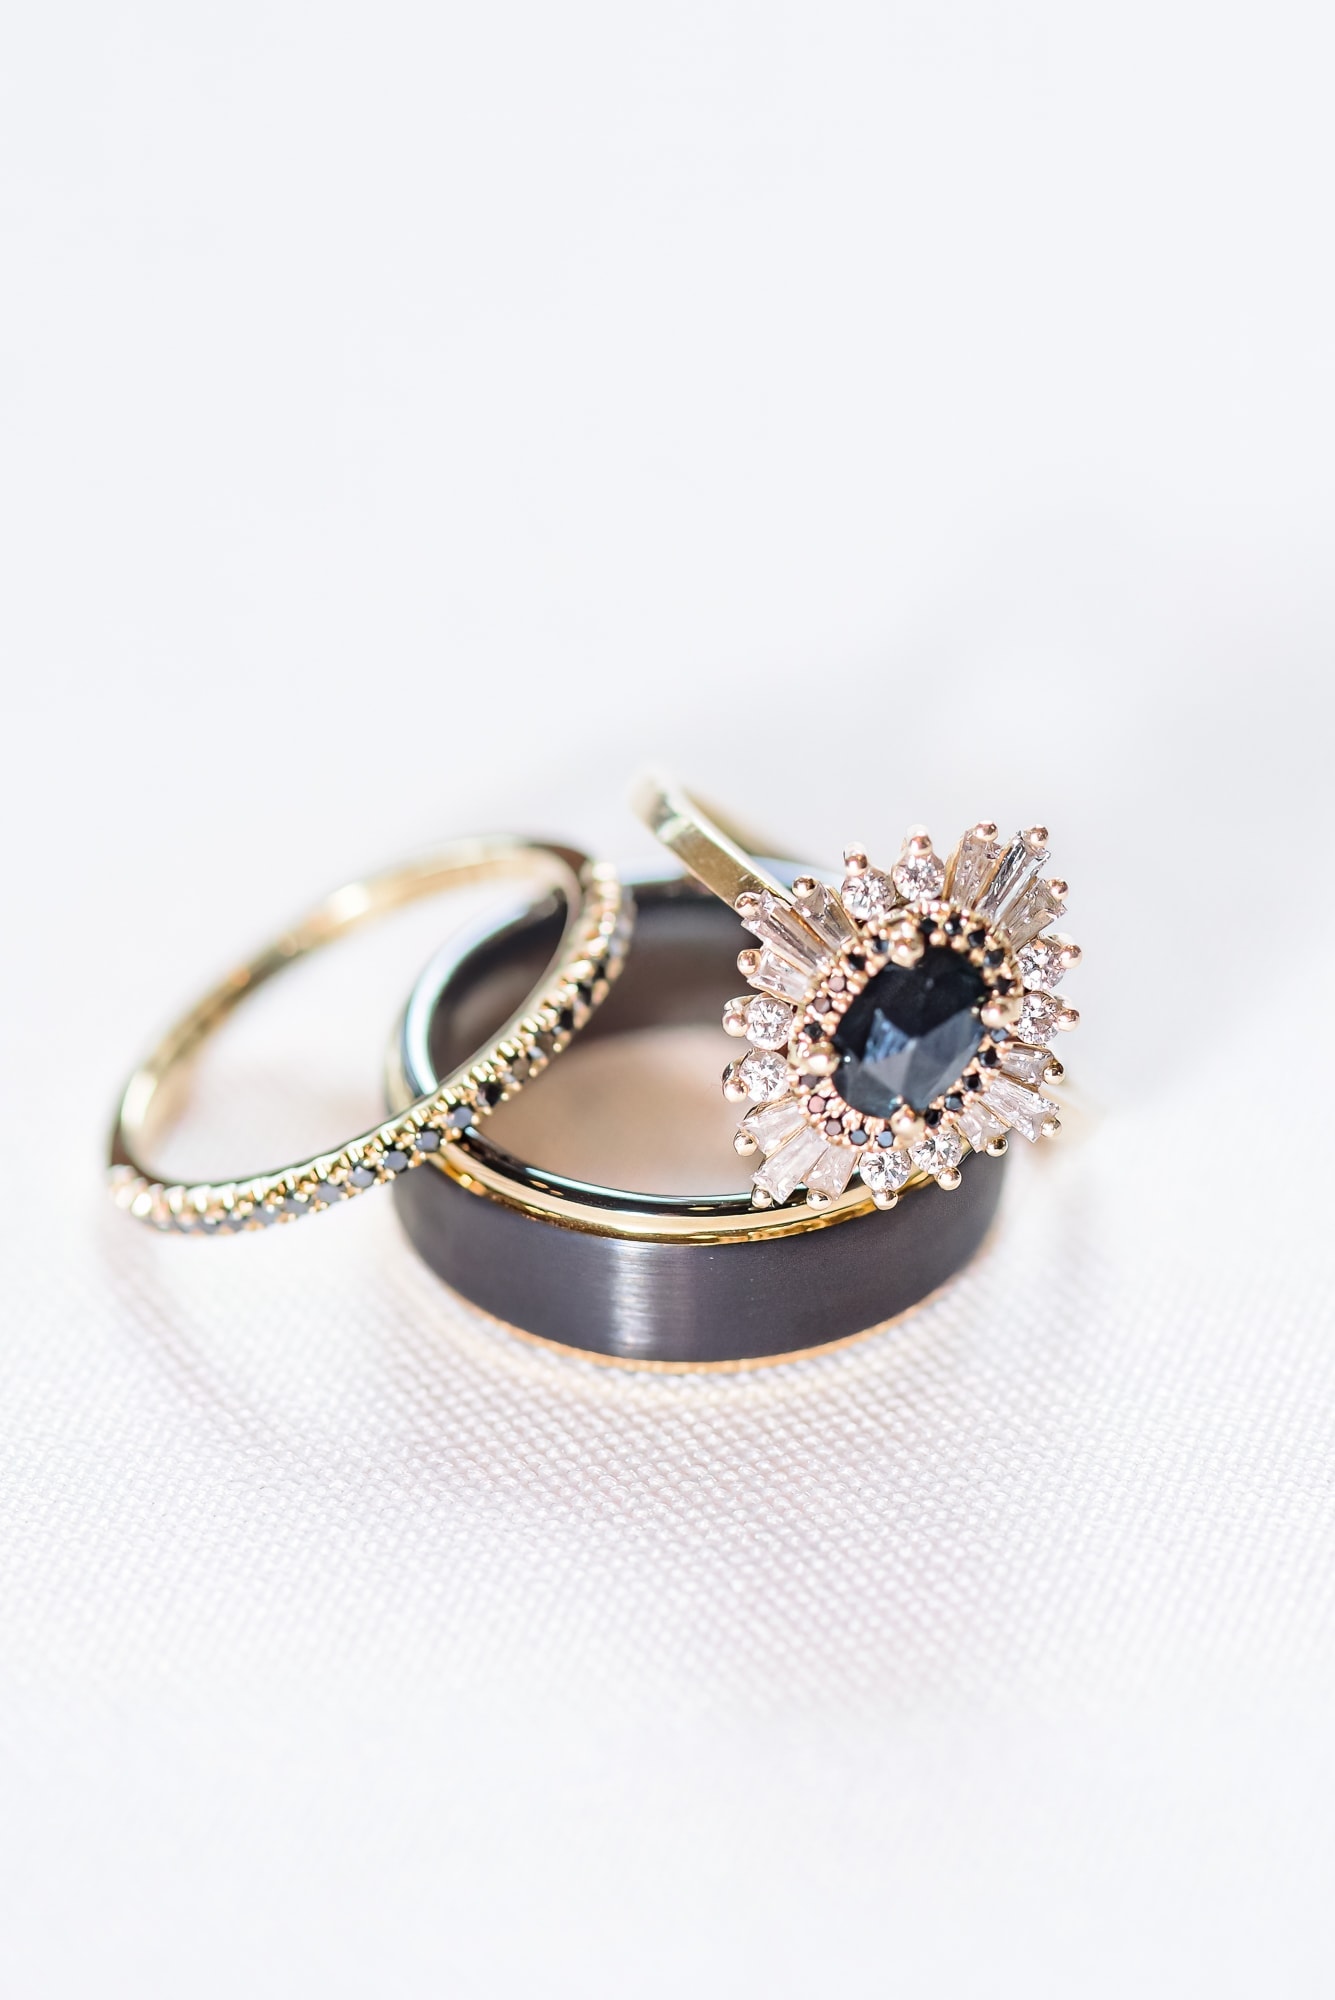 This Whitehead Manor wedding had a unique set of engagement rings, with a dark black stone in the middle of a gold setting.